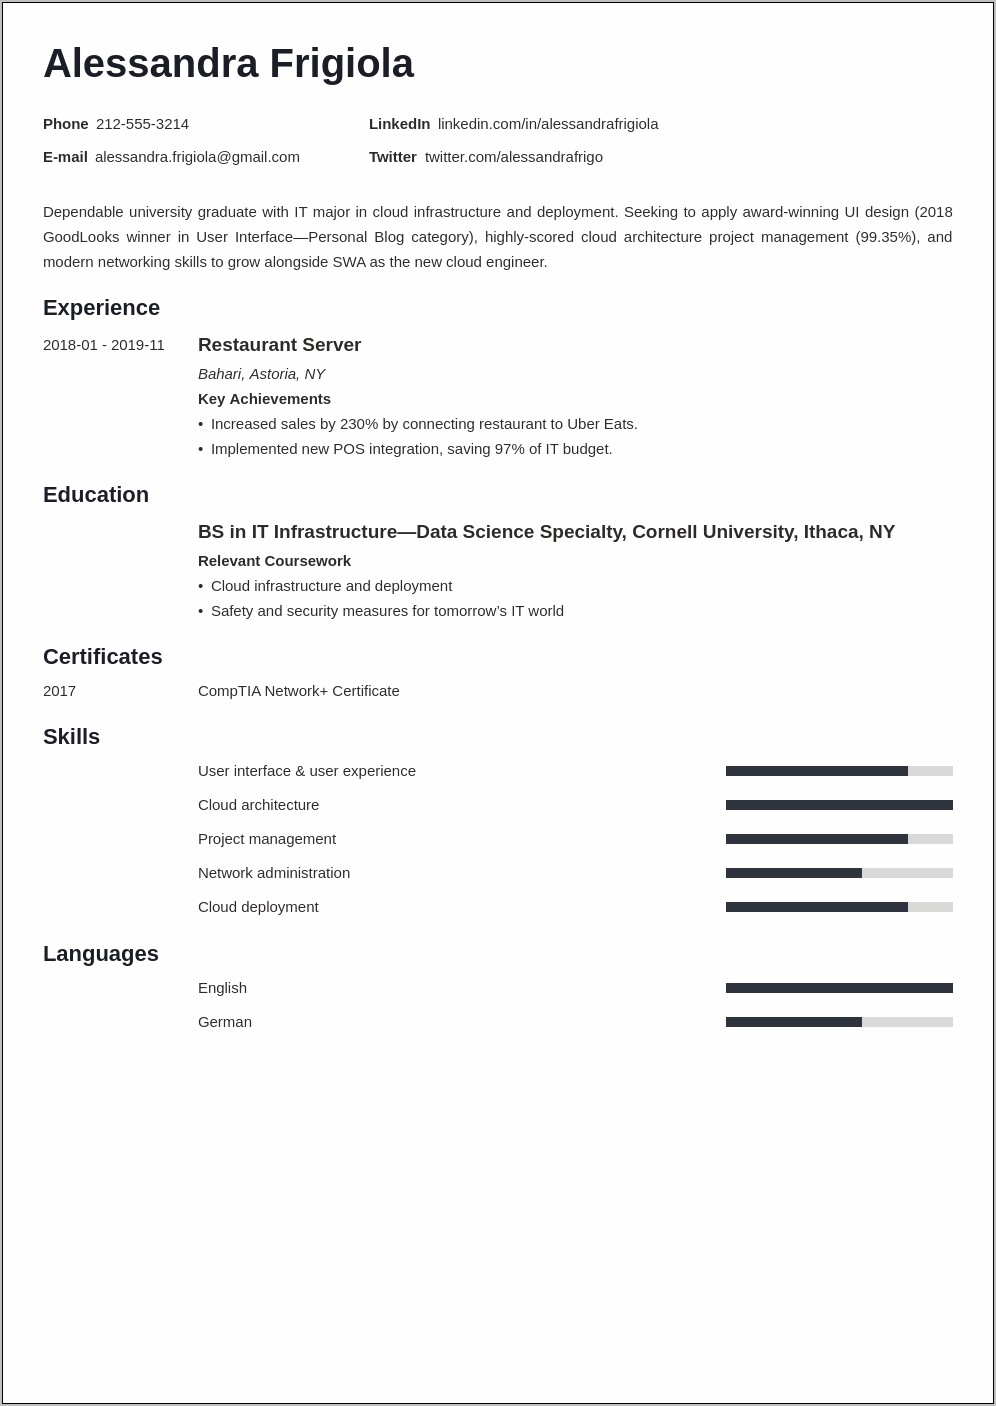 Administrative Assistant Resume Objective Statements